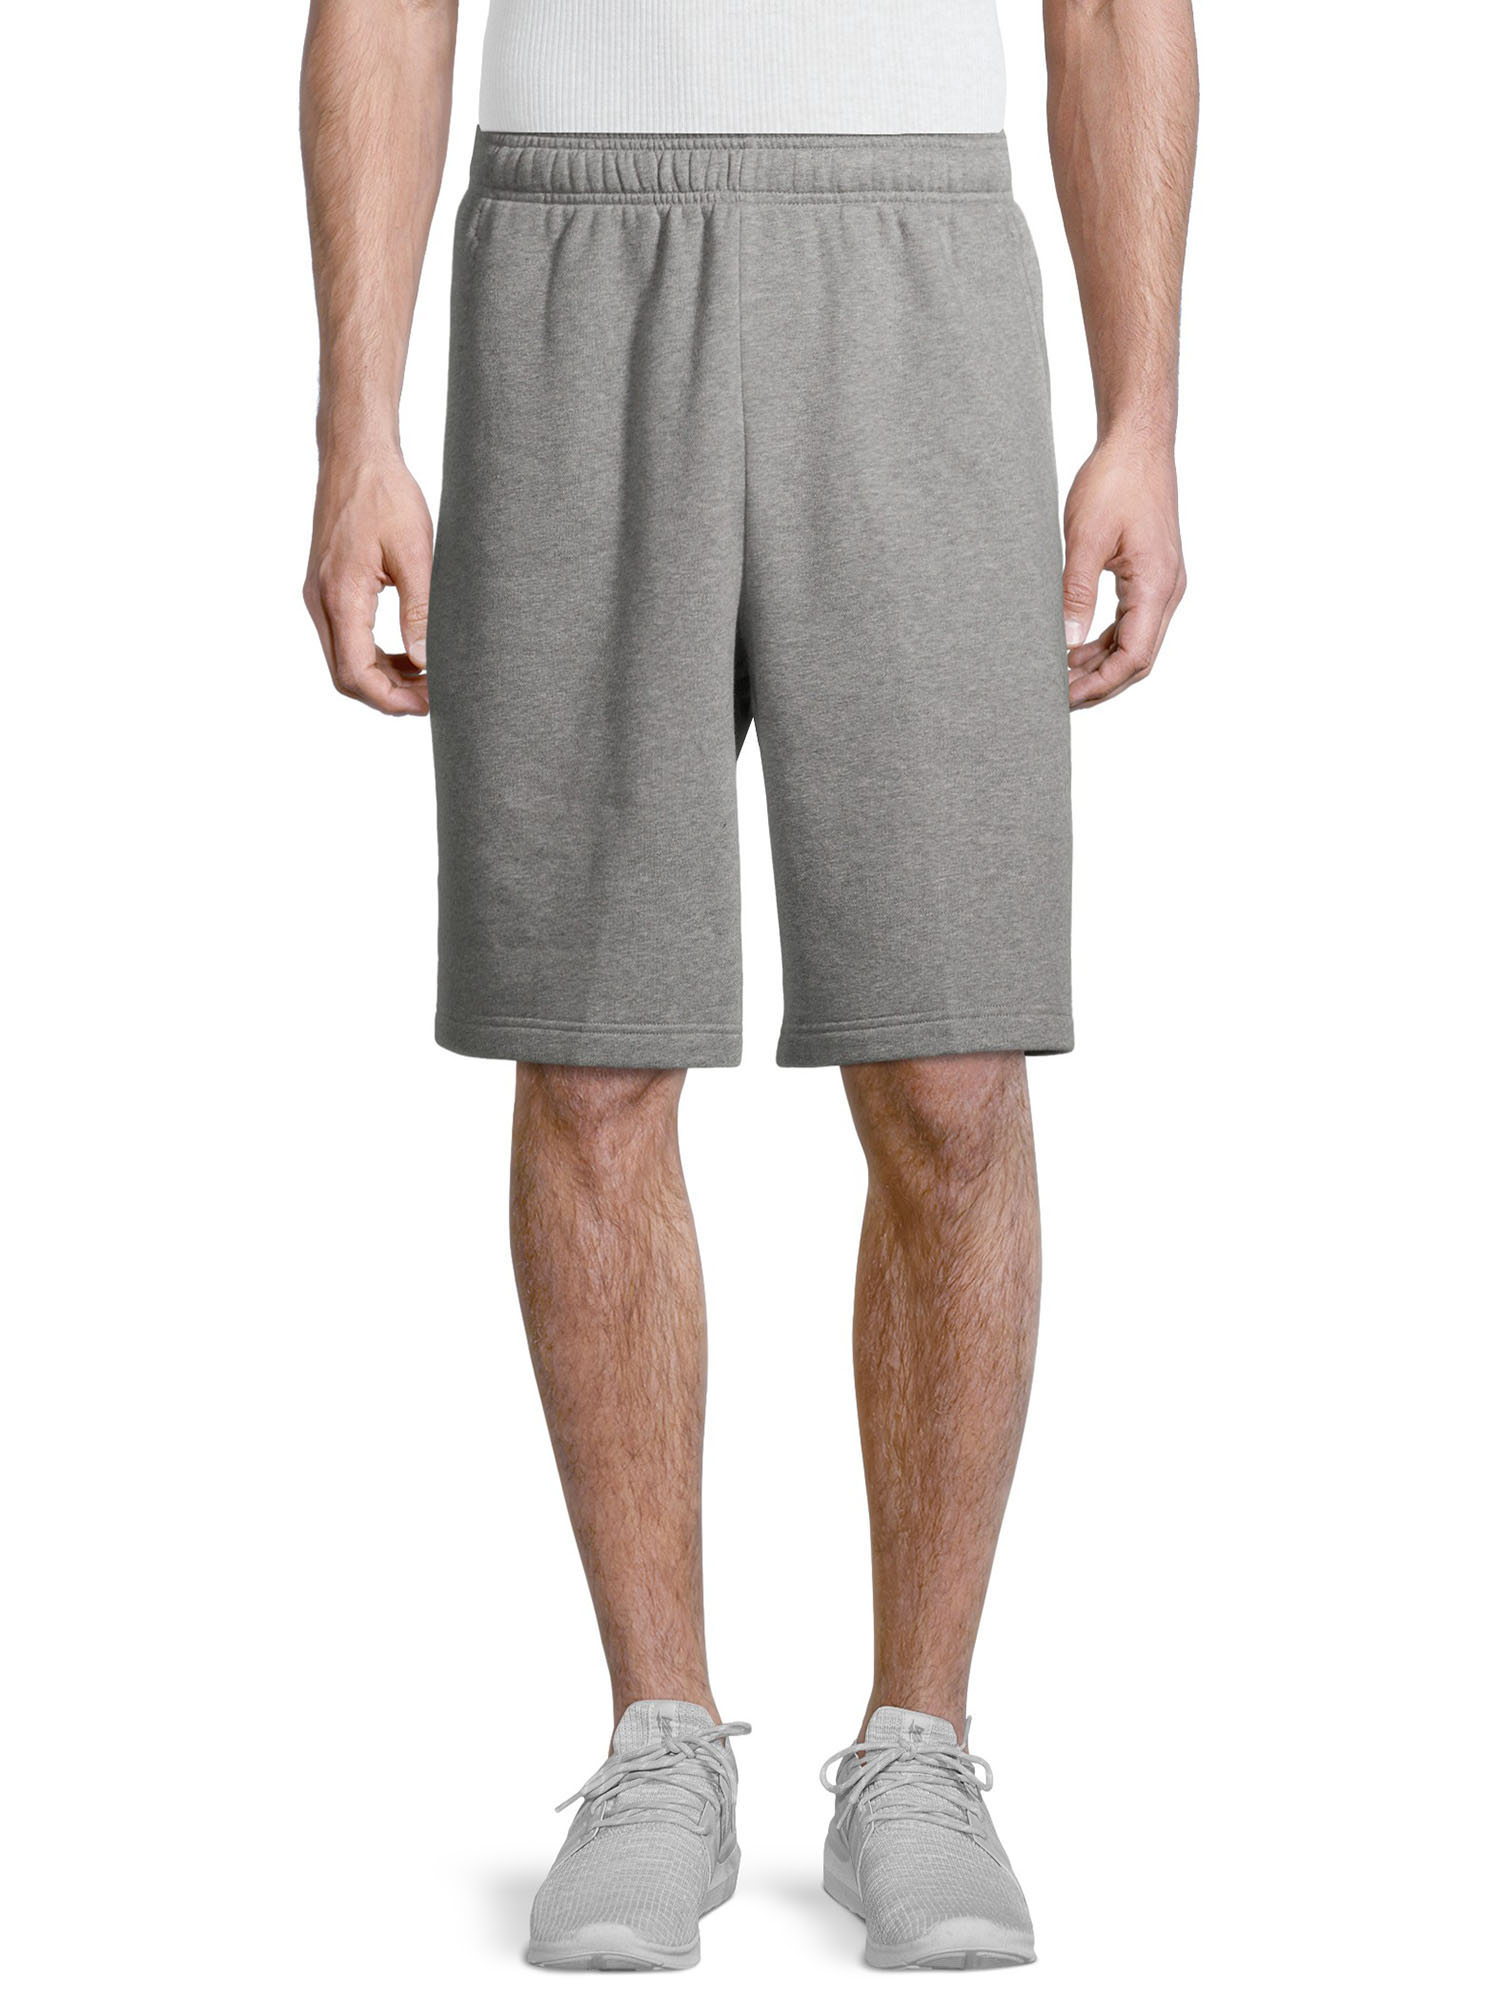 Athletic Works Men's and Big Men's Active Fleece Short, up to Size 5XL - image 1 of 6